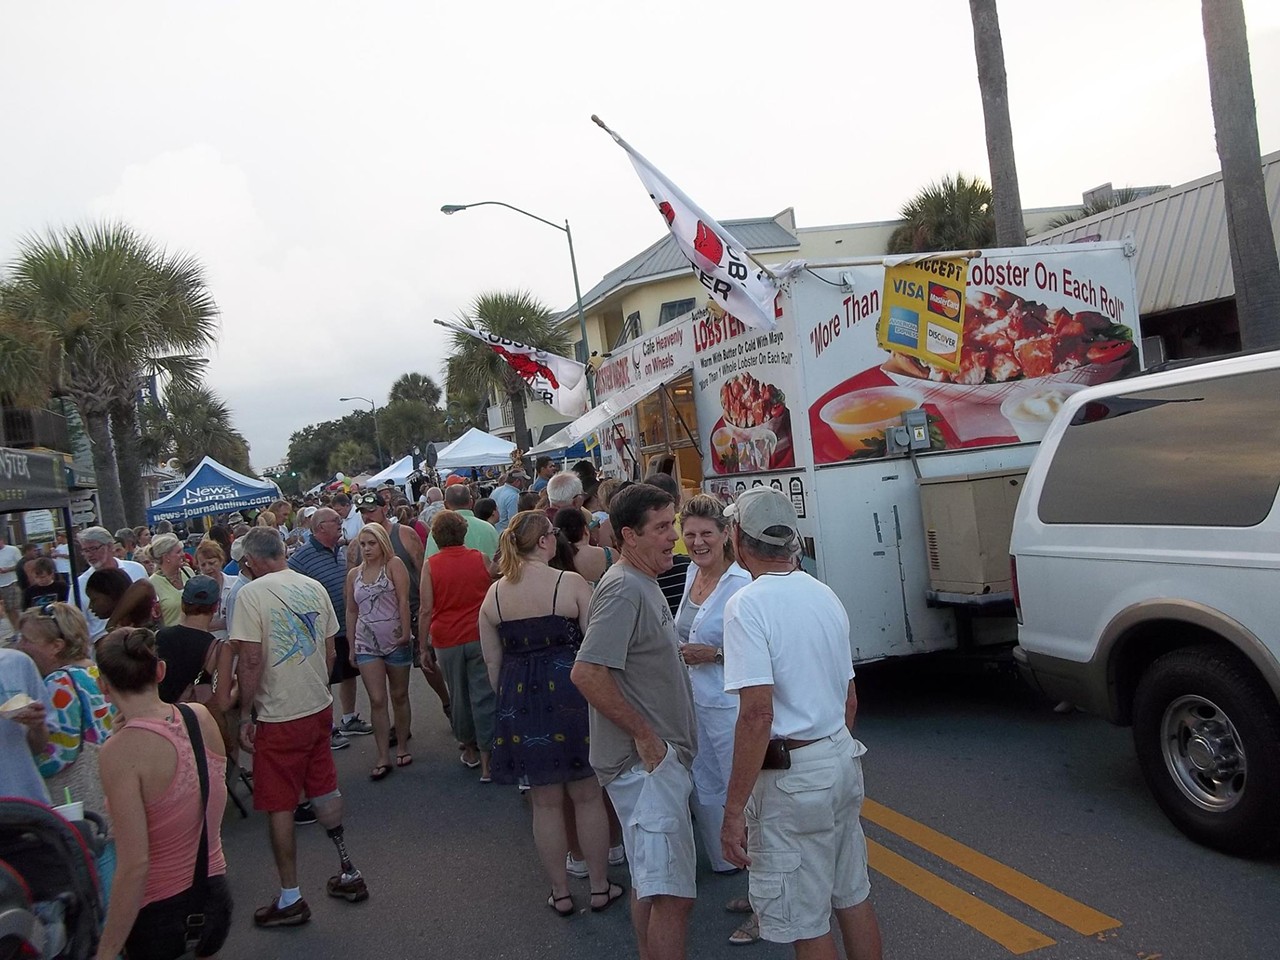 New Smyrna Shrimp & Seafood Festival
Along Flagler Avenue in the NSB Waterfront LOOP, New Smyrna Beach, Aug. 4, 5-9 p.m.
Come celebrate the 9th annual New Smyrna Shrimp & Seafood Festival where more than 50 restaurants will compete for the &#147;Best on the Beach&#148; awards. They&#146;ll have tastings of their specialties which you can try for $3-5 while you enjoy the live entertainment.  
Photo via Dave Marye, Keyes Realty/Facebook